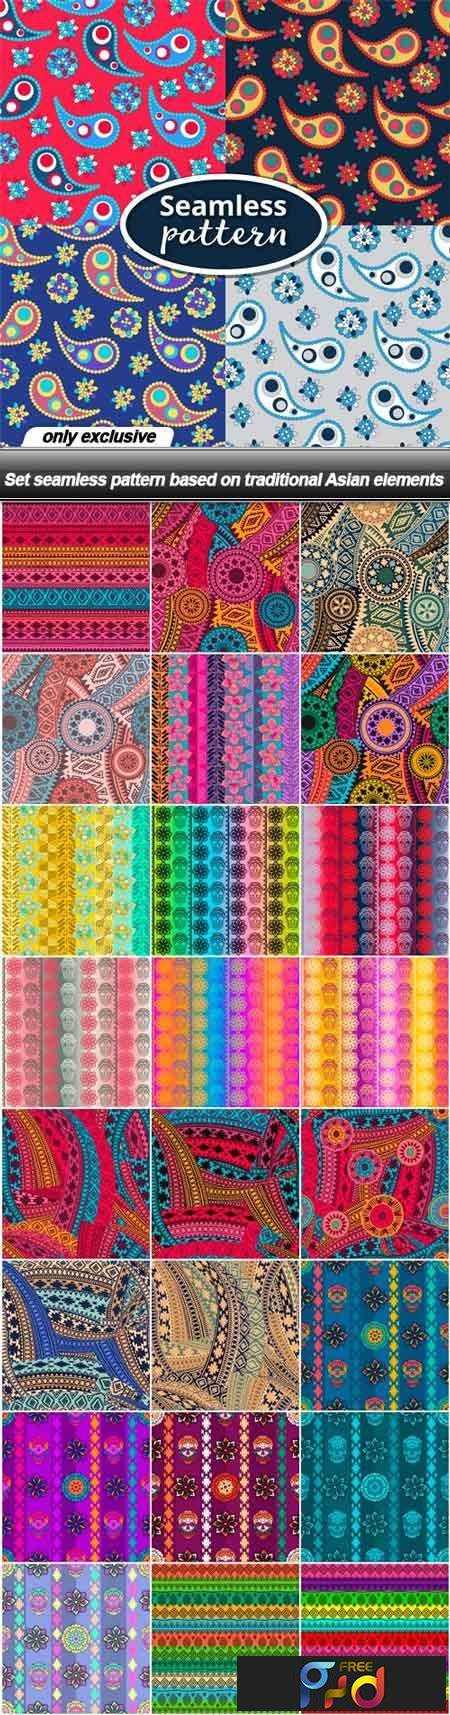 FreePsdVn.com_VECTOR_1701206_set_seamless_pattern_based_on_traditional_asian_elements_25_eps